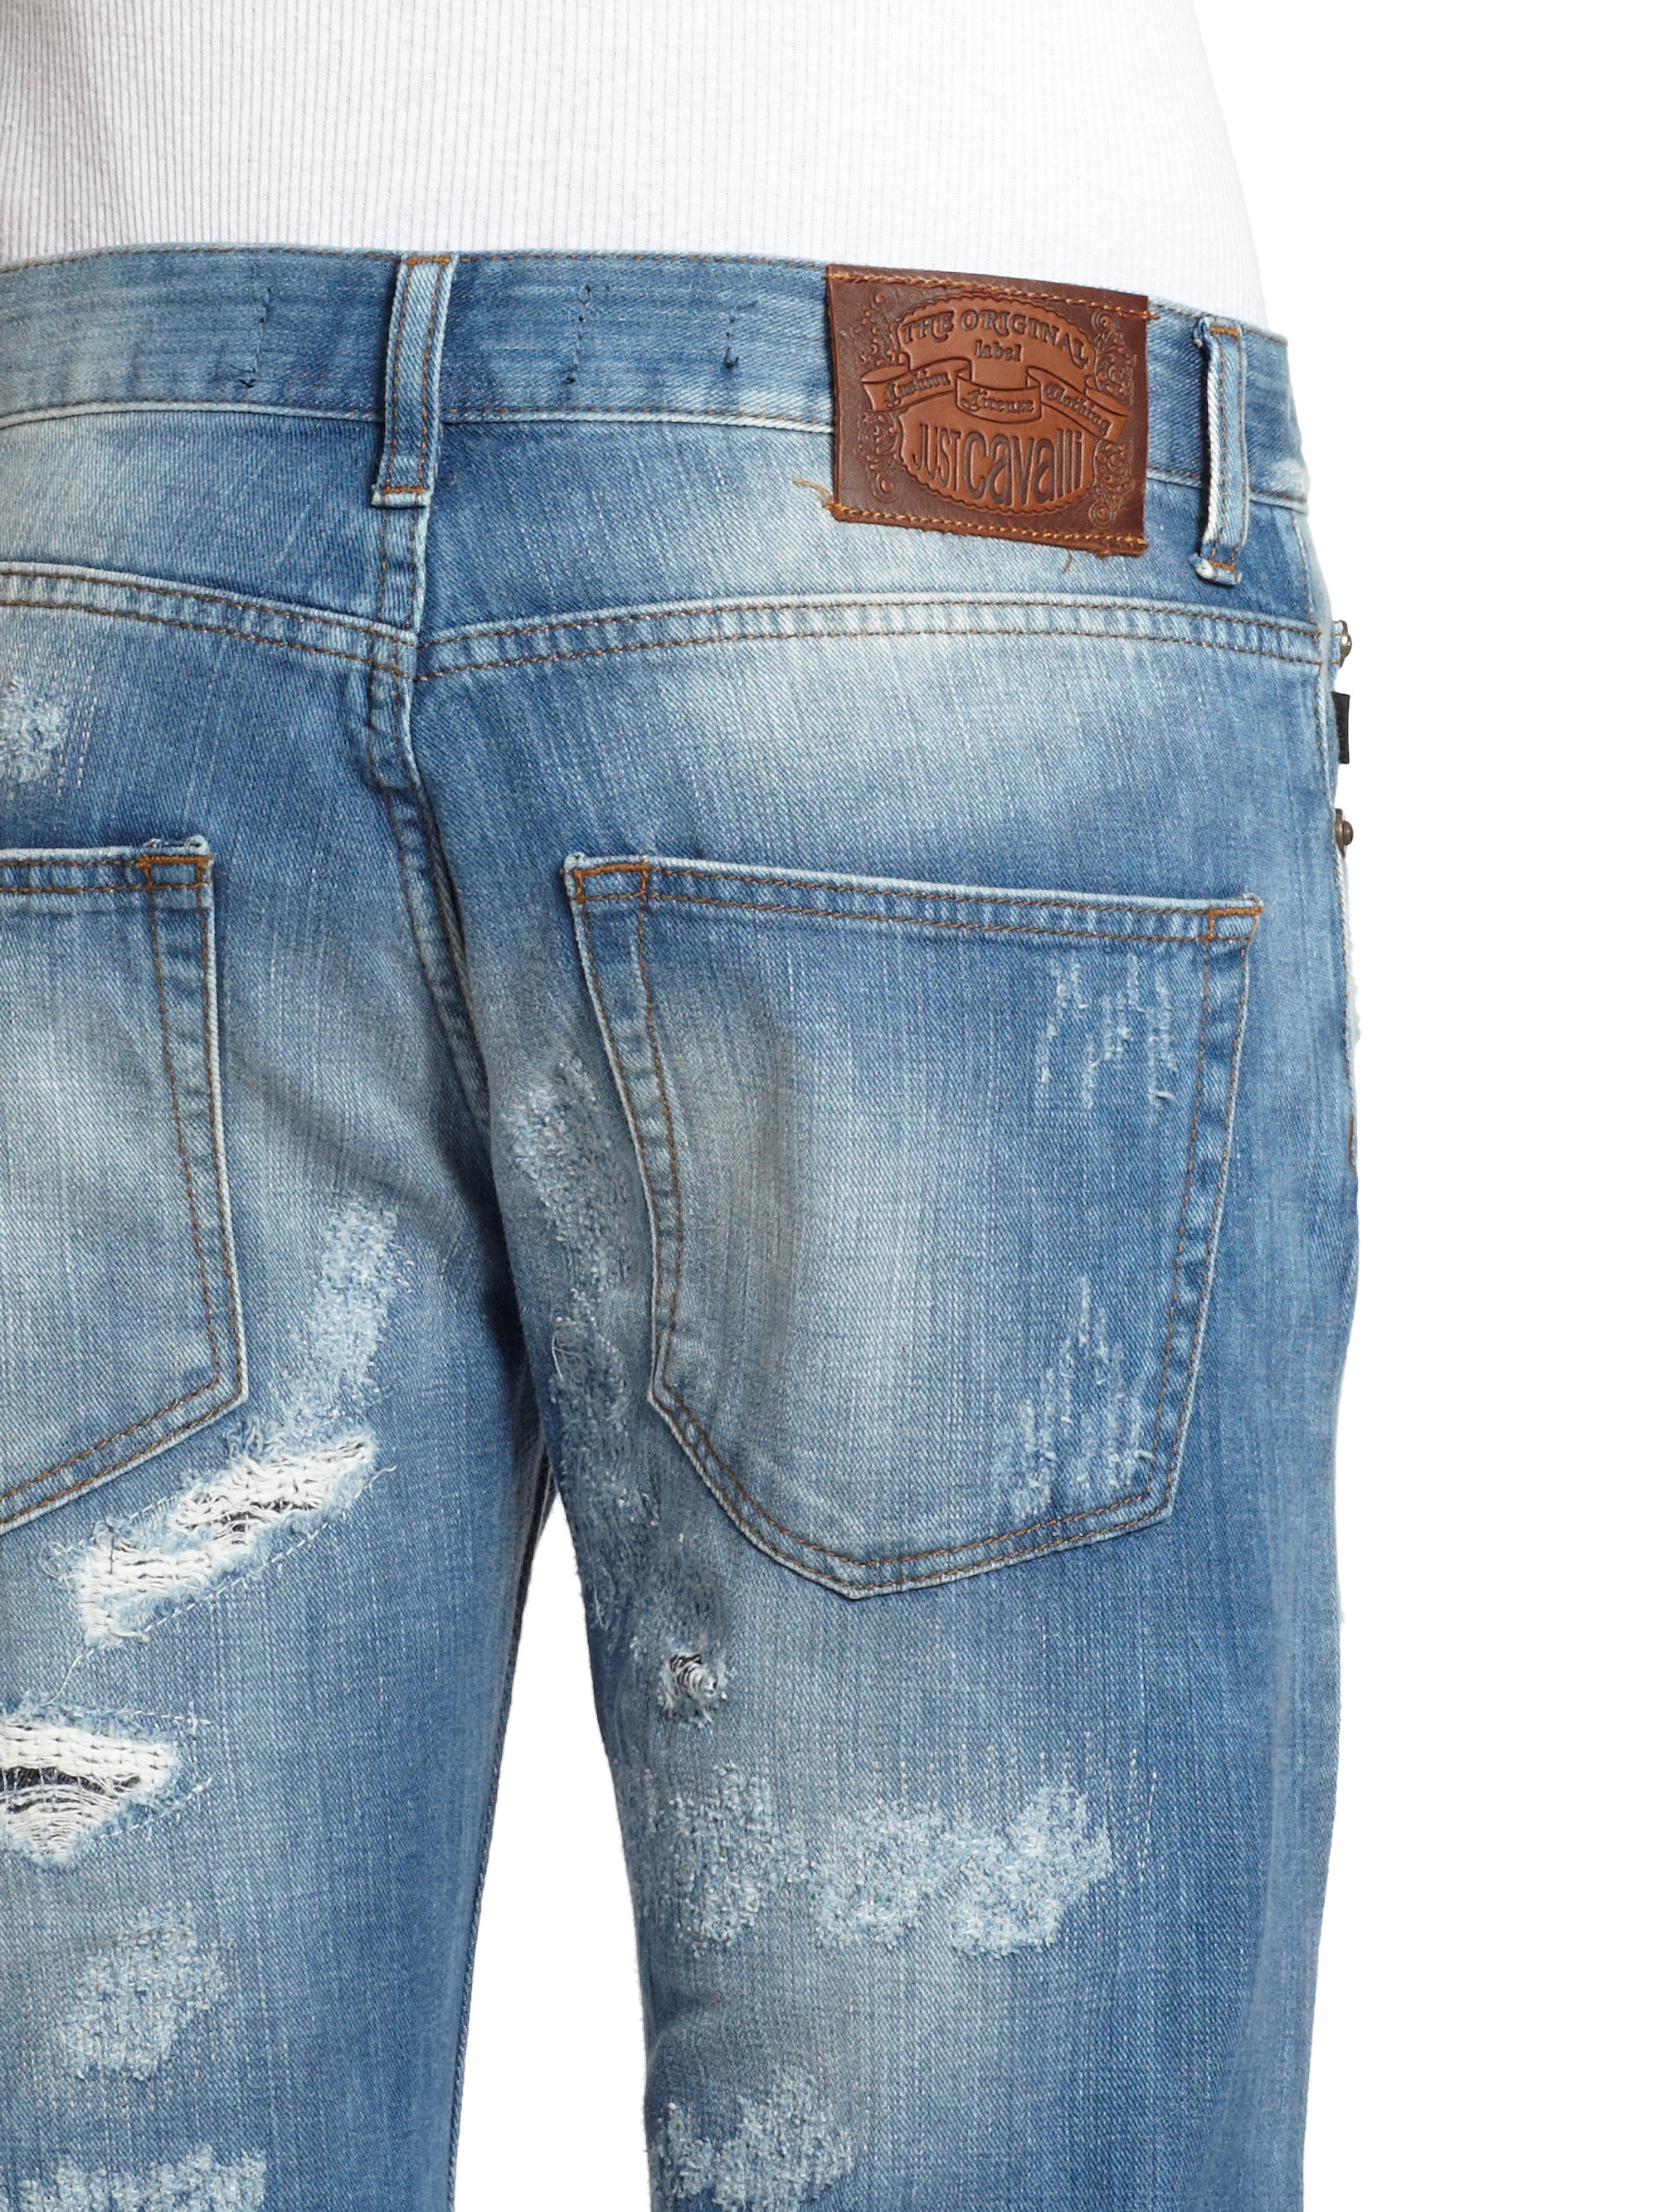 Lyst - Just Cavalli Patch Detail Distressed Straightleg Jeans in Blue ...